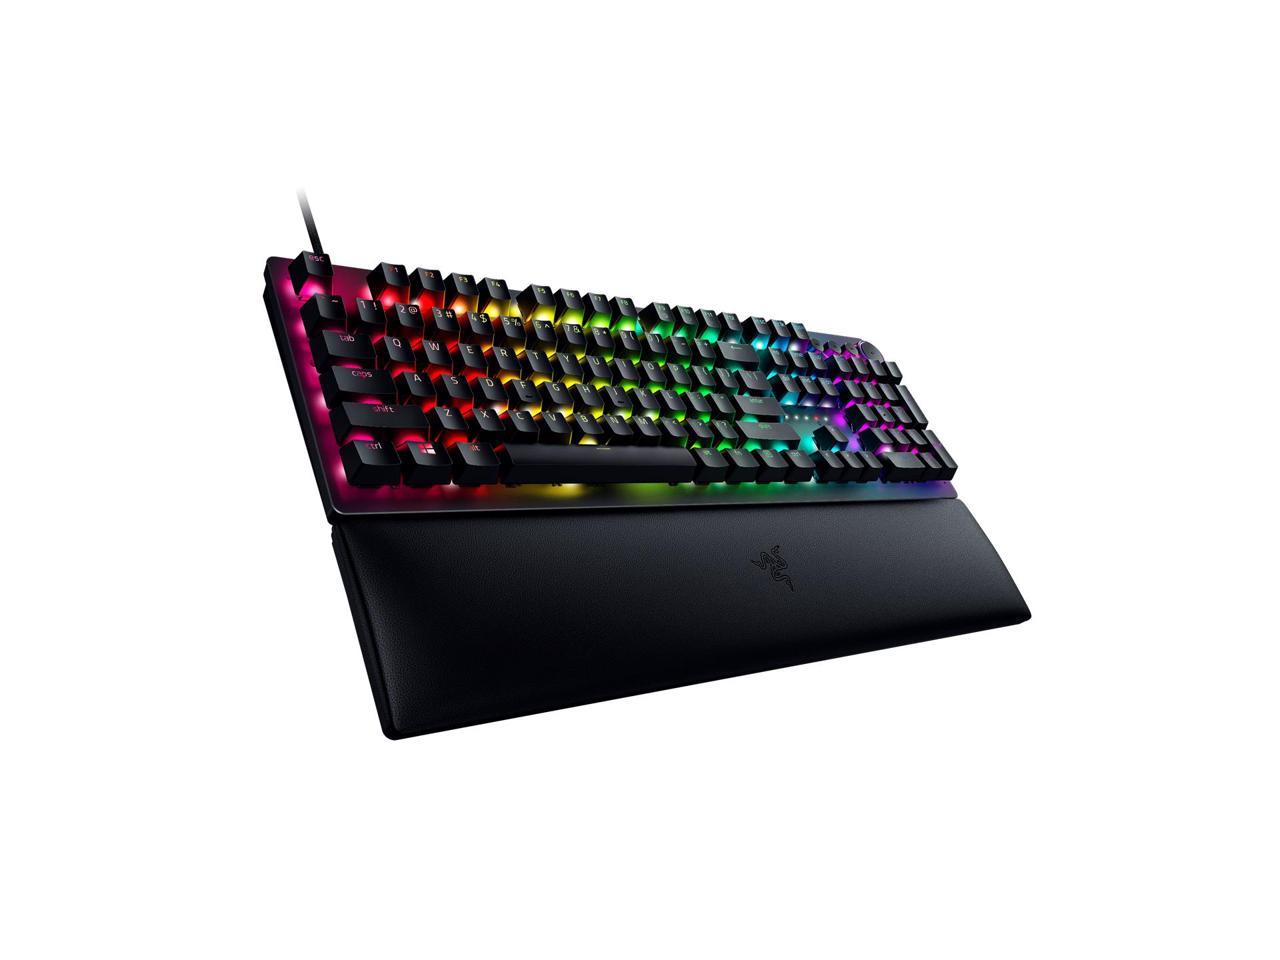 Razer Huntsman V2 Optical Gaming Keyboard: Fastest Clicky Optical Switches w/ Quick Keystrokes & 8000Hz Polling Rate - Doublesho